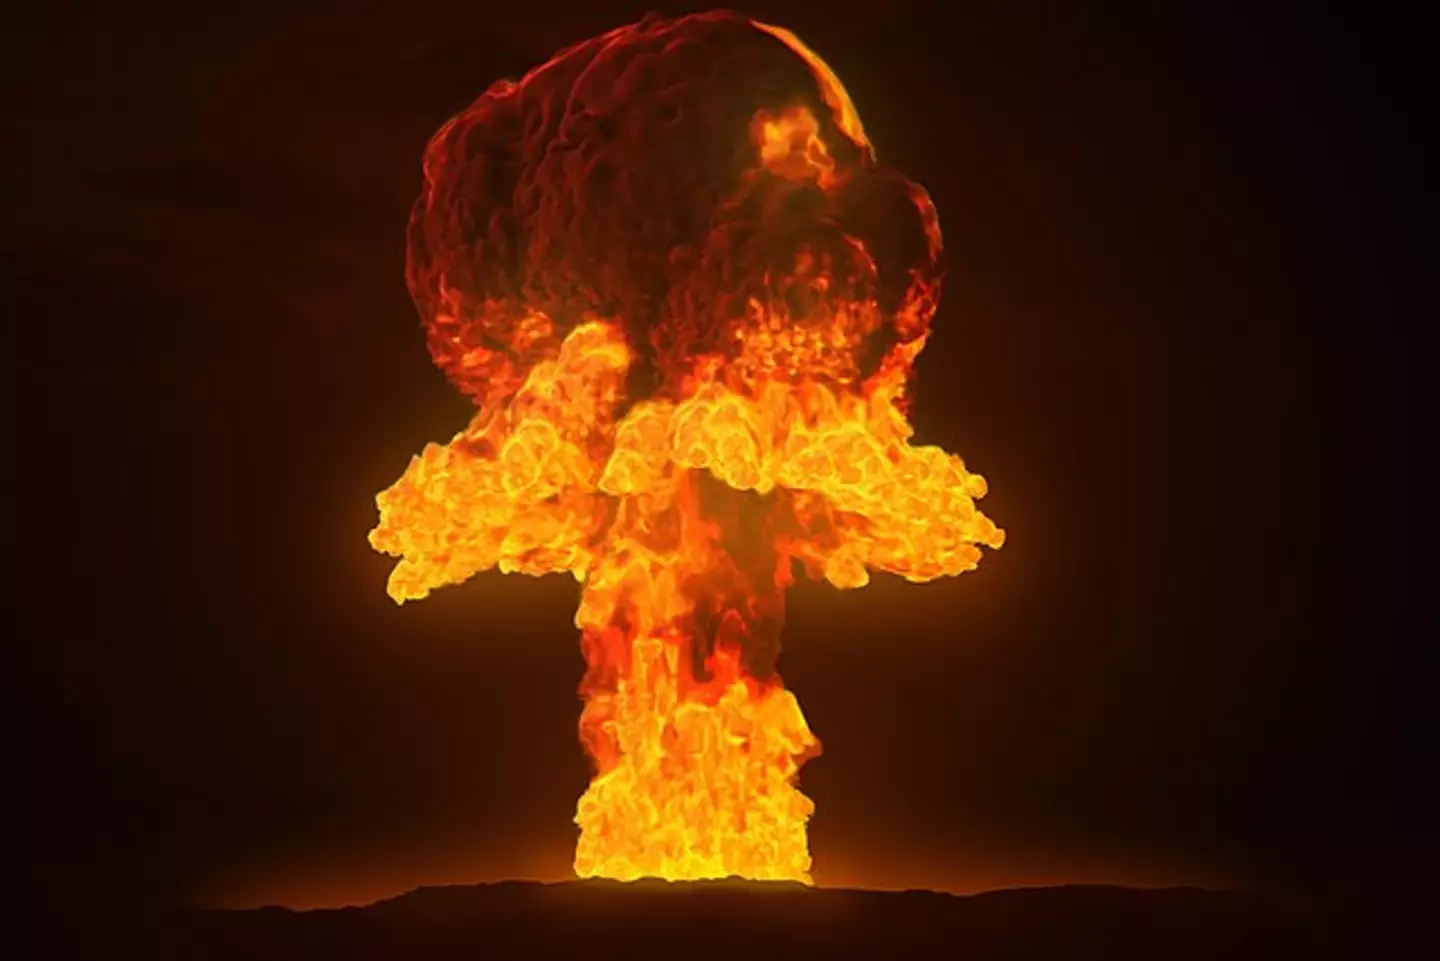 A new map shows what would happen if a nuclear bomb were to hit your home.